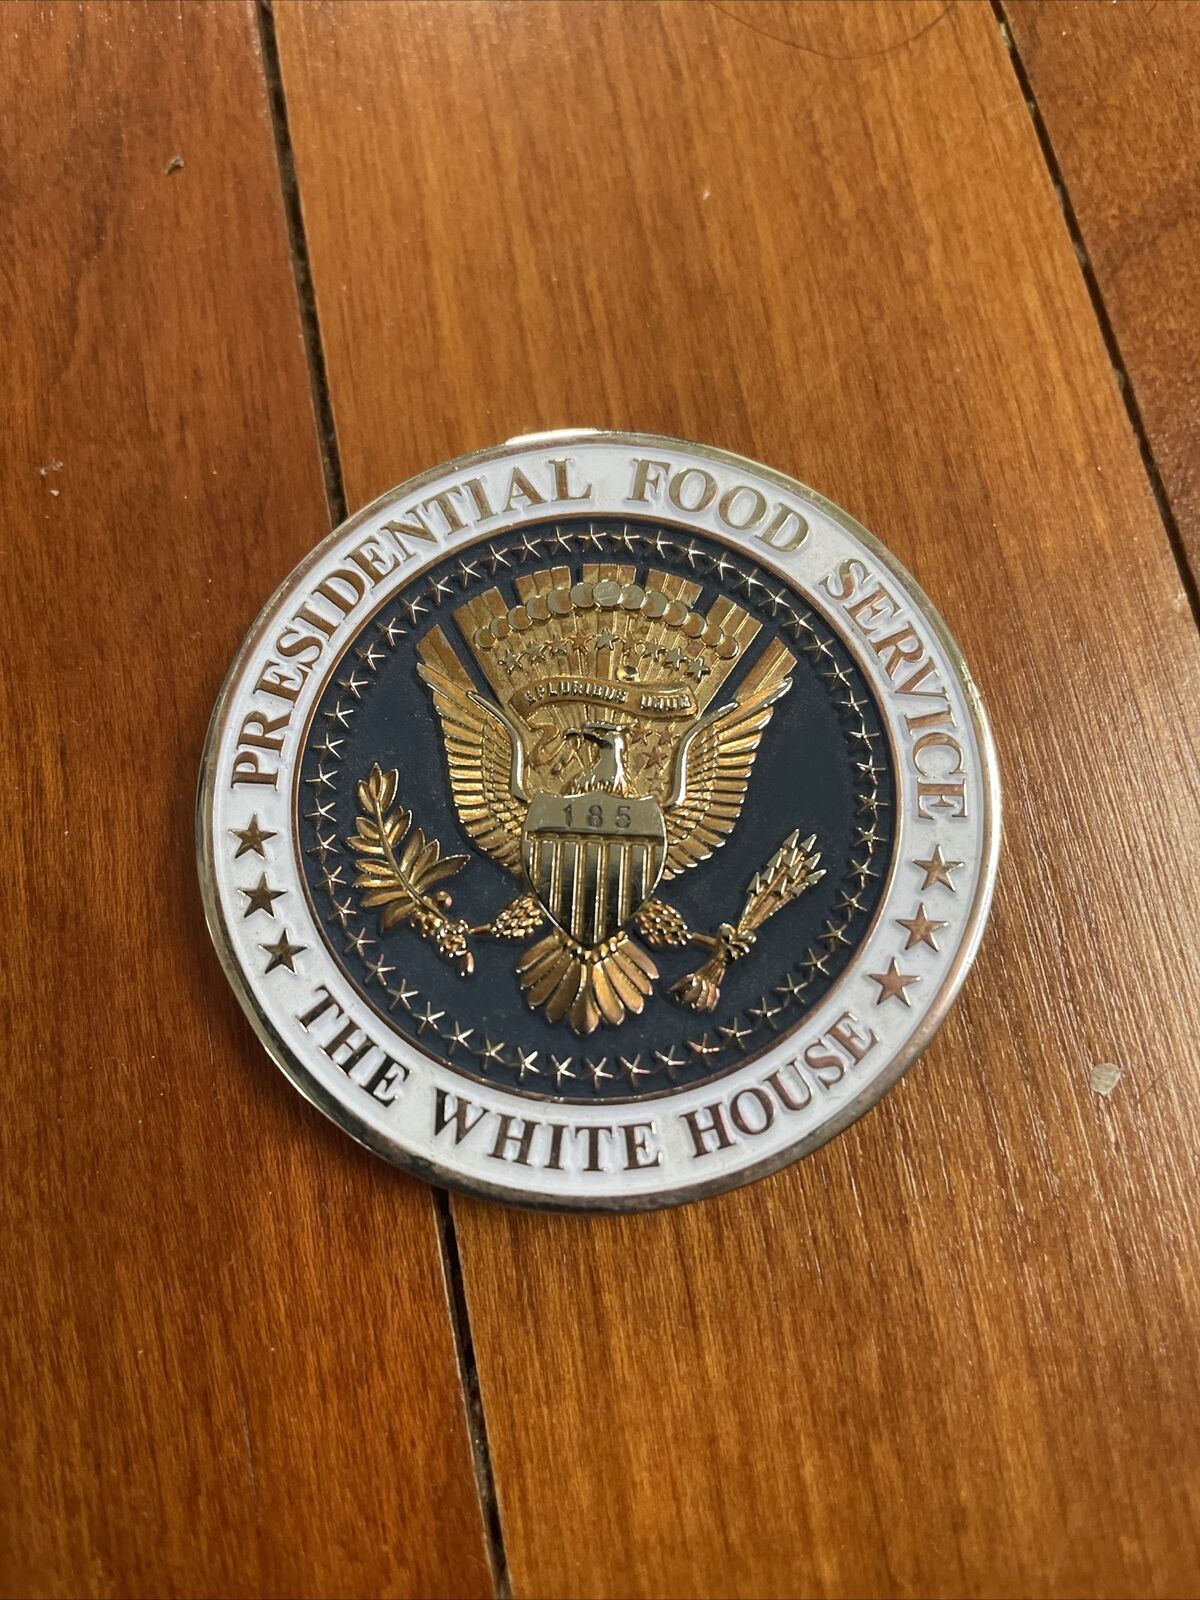 Authentic White House Navy Chief Coin Serial #185 Presidential Food Service